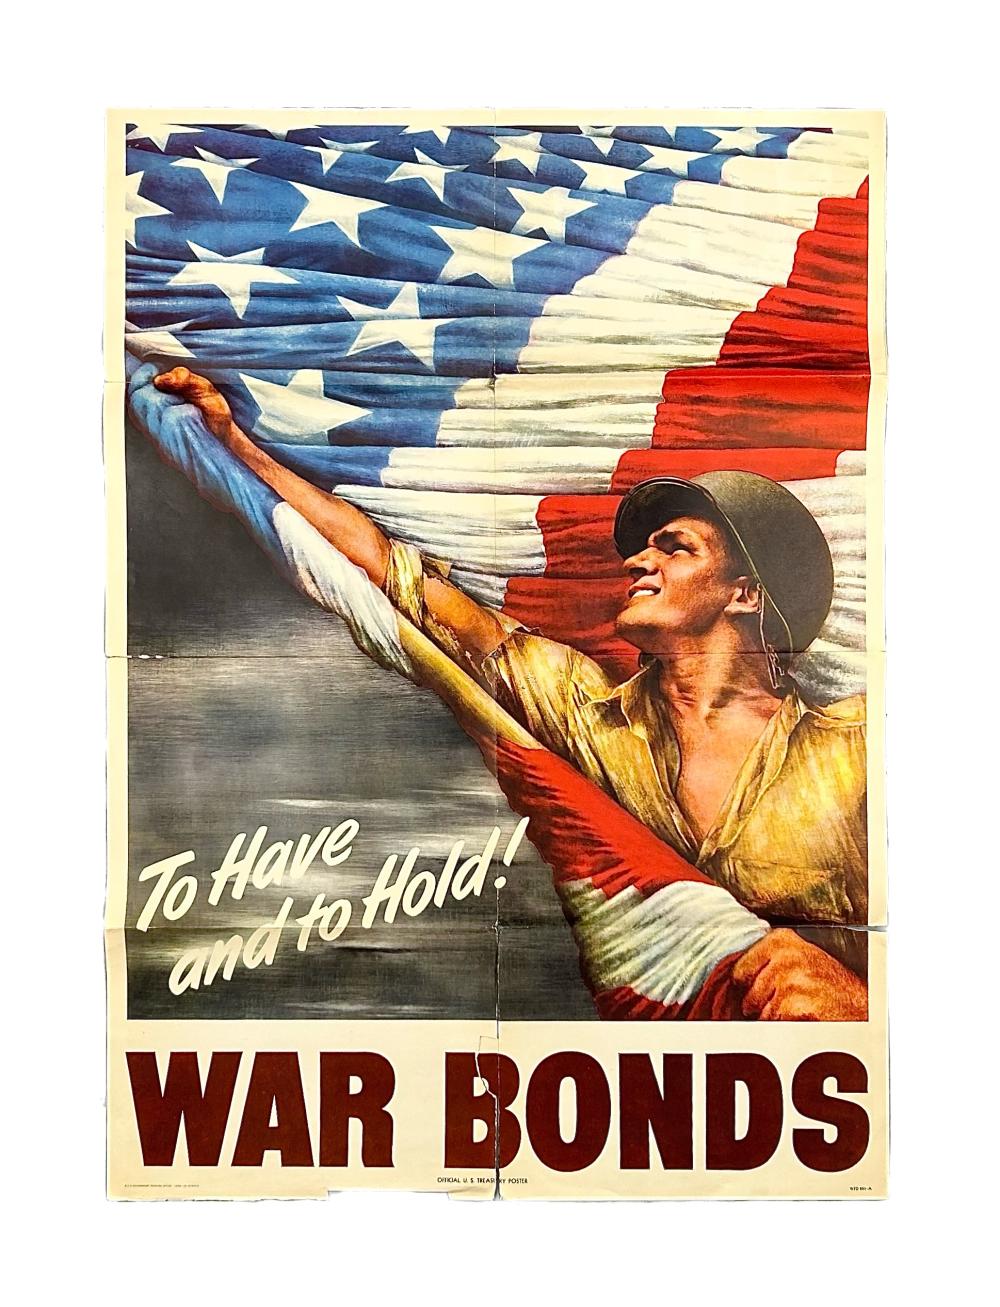 "TO HAVE AND TO HOLD!" WORLD WAR